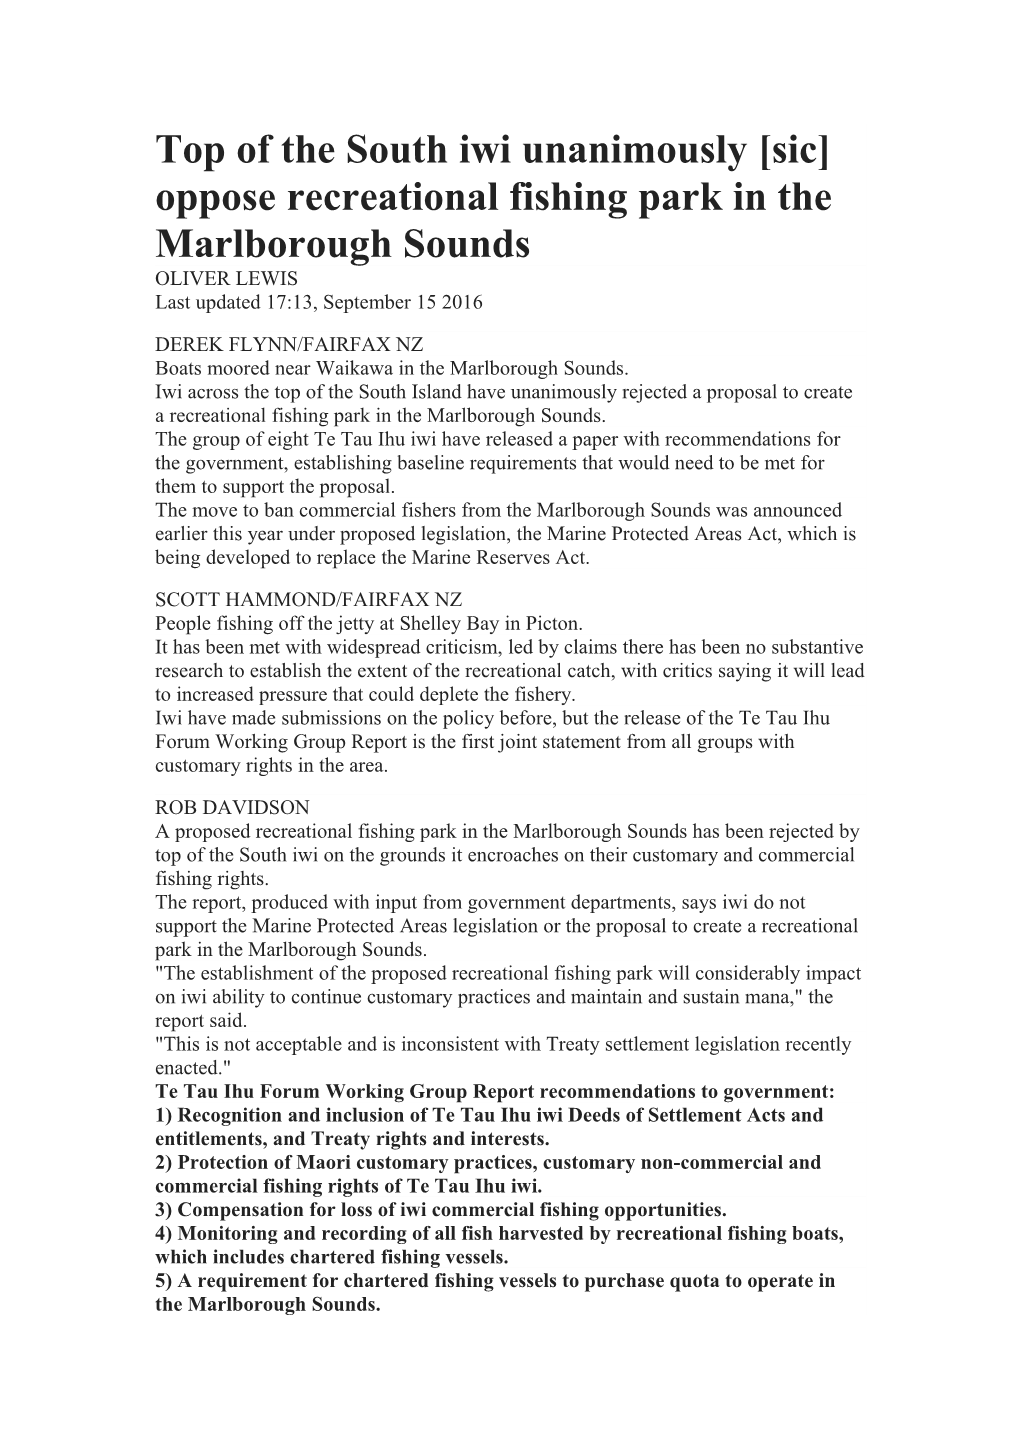 Top of the South Iwi Unanimously Sic Oppose Recreational Fishing Park in the Marlborough